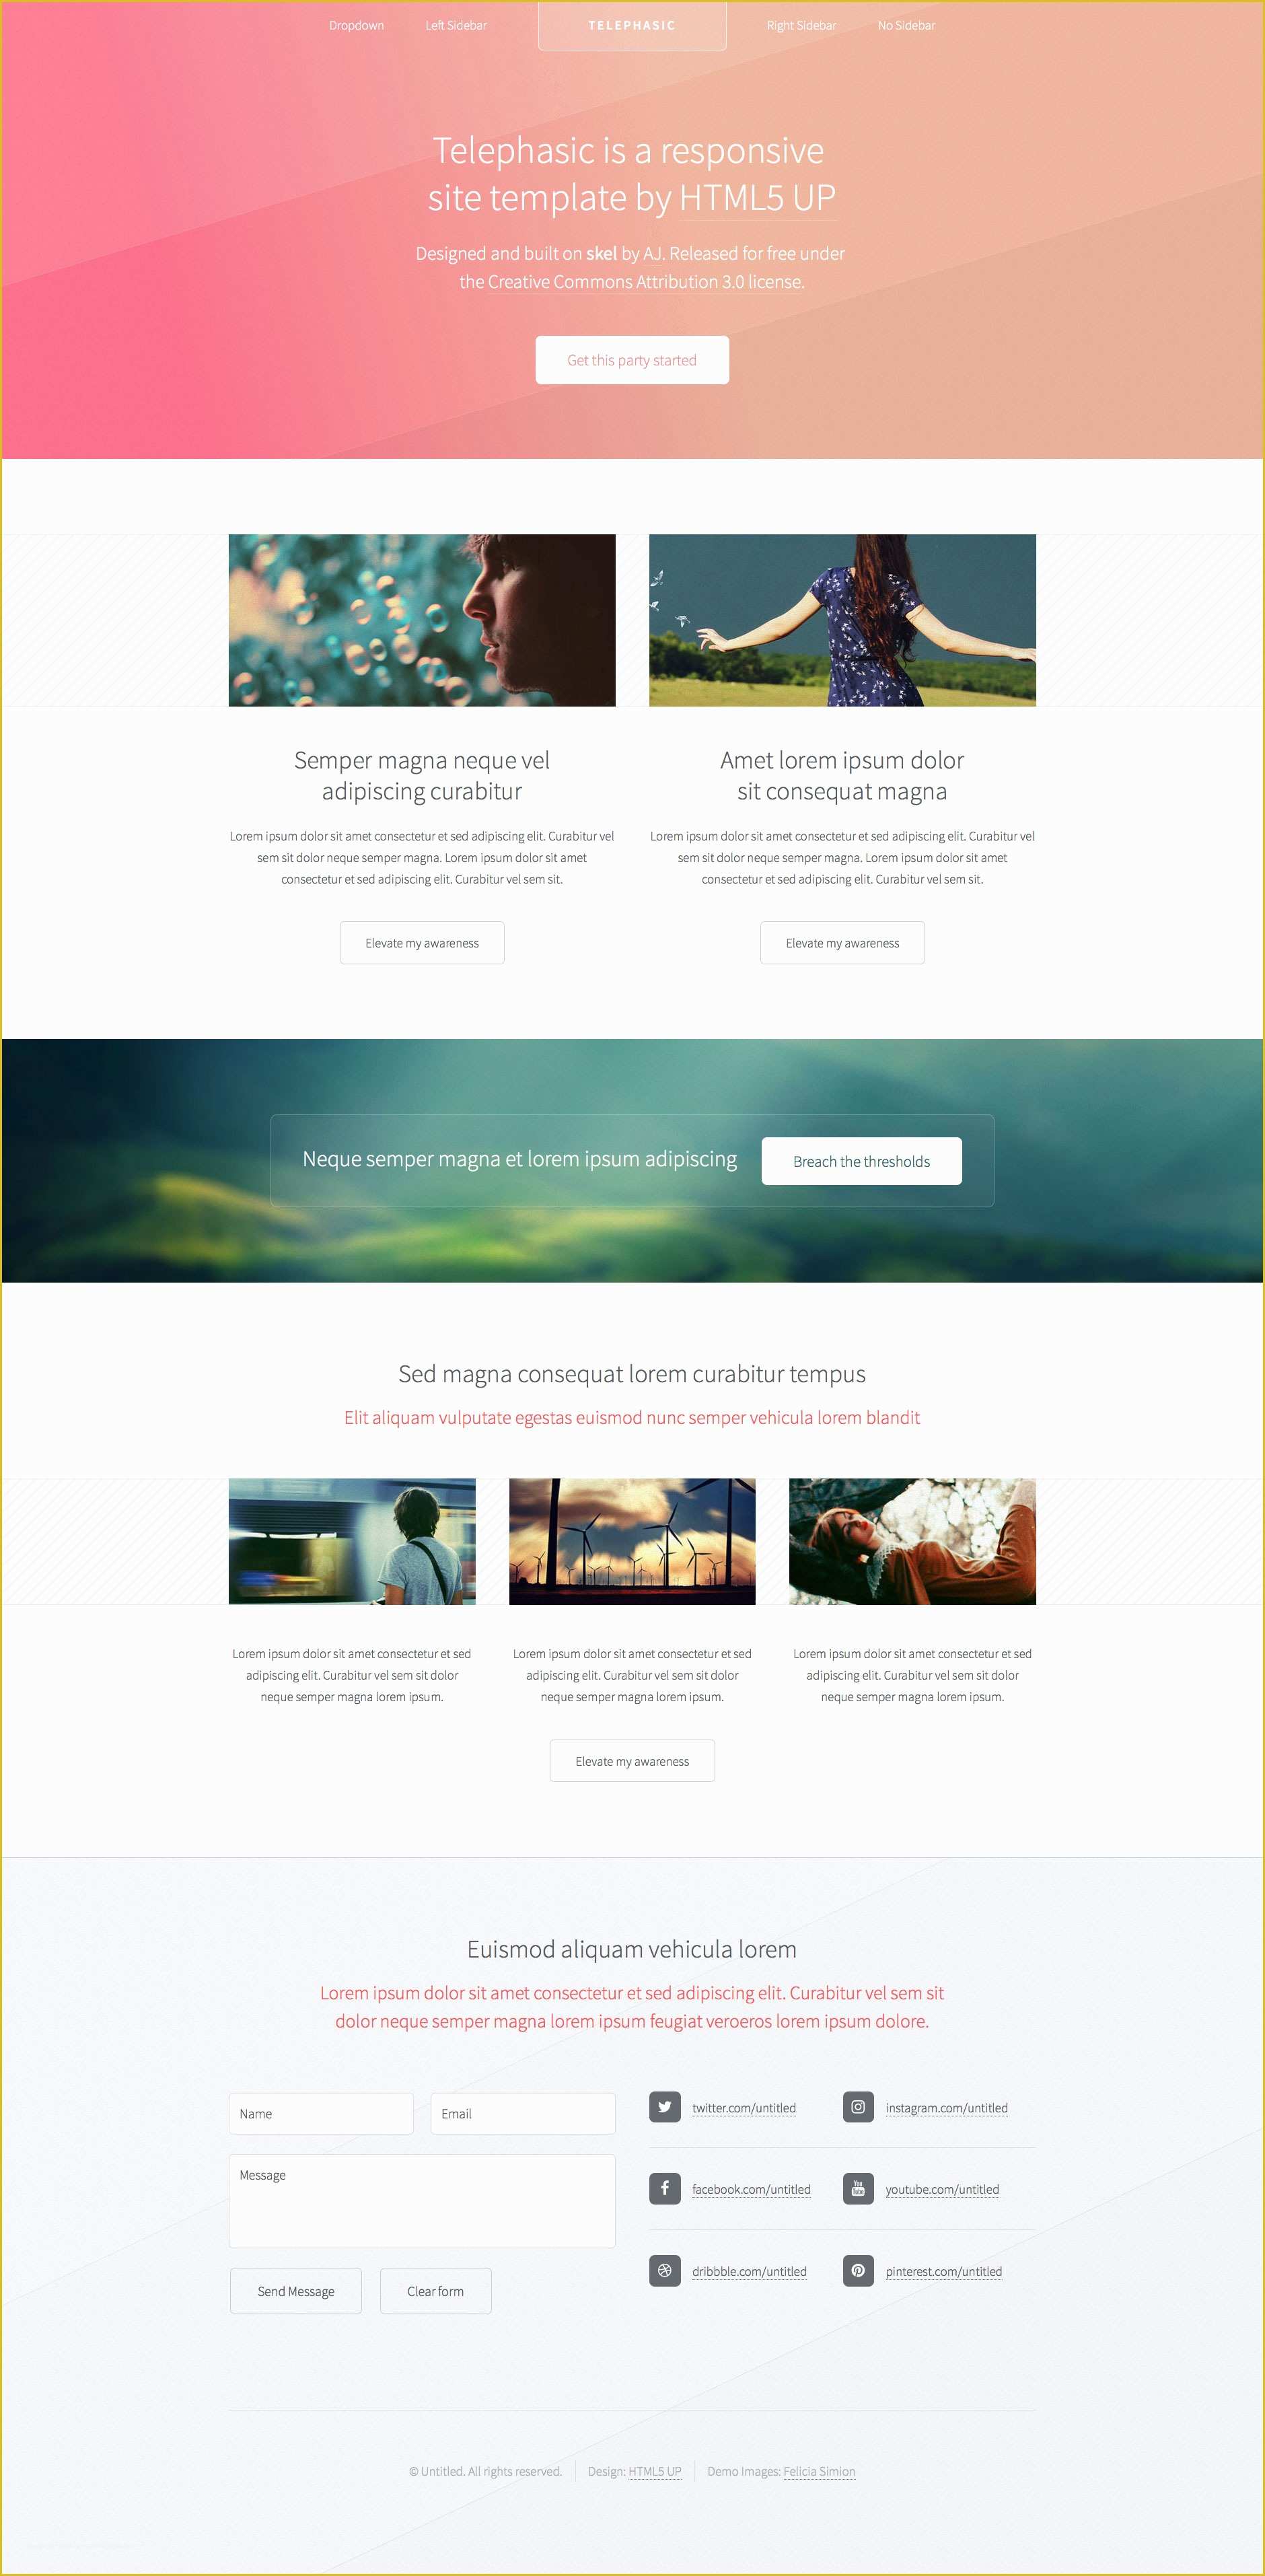 Html5 Responsive Templates Free Download Of Telephasic Free Responsive HTML5 Template HTMLtemplates Co